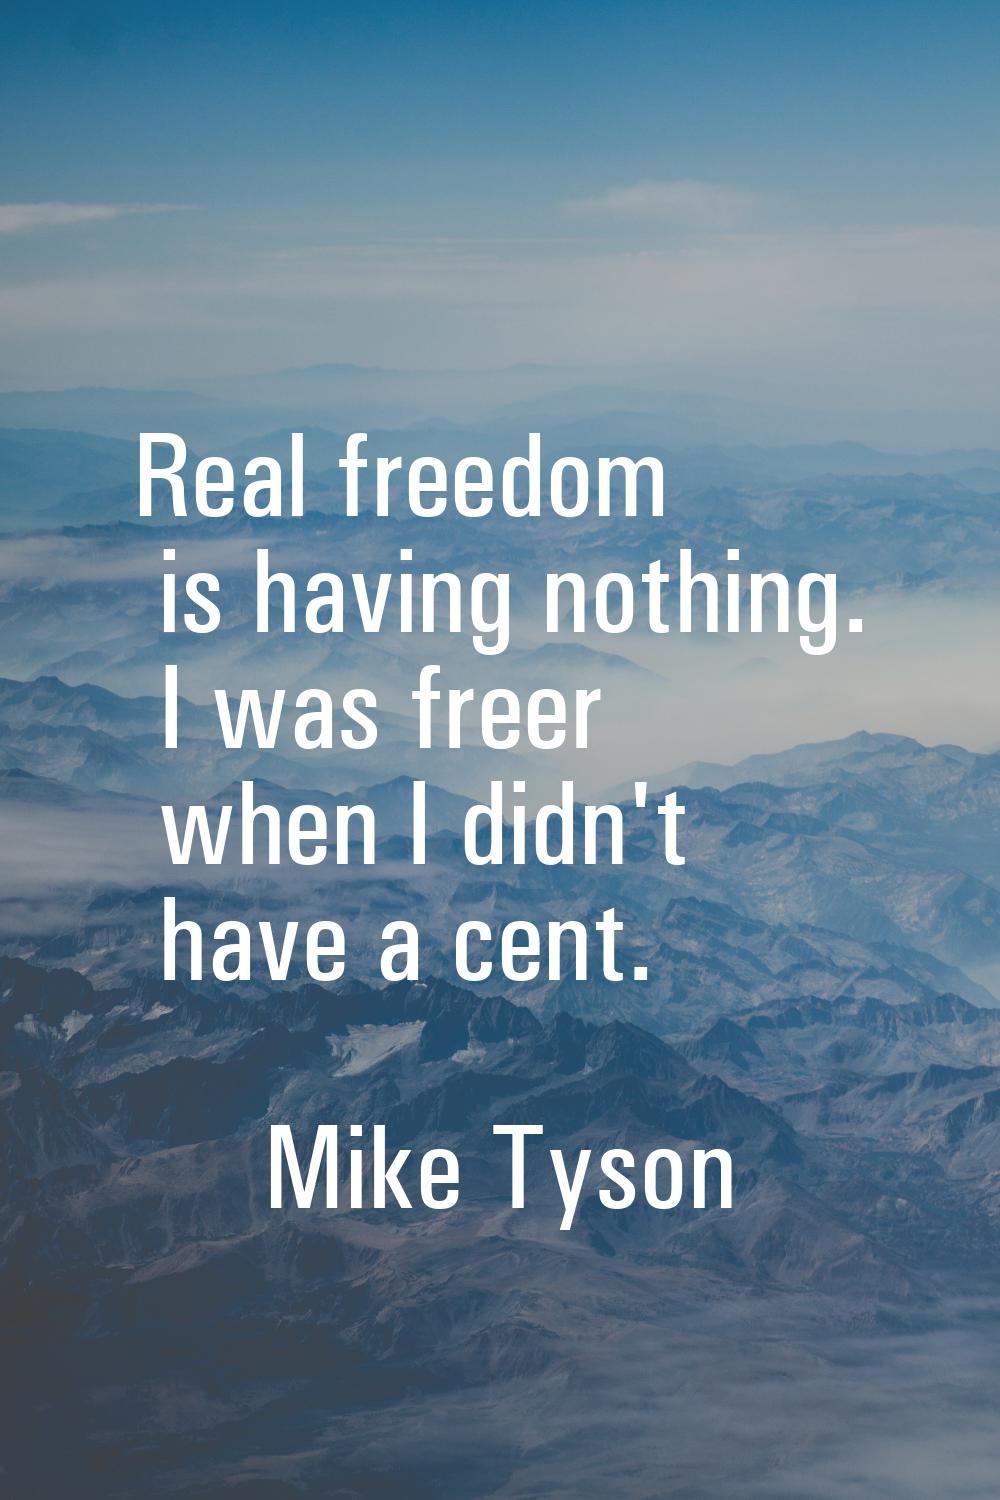 Real freedom is having nothing. I was freer when I didn't have a cent.